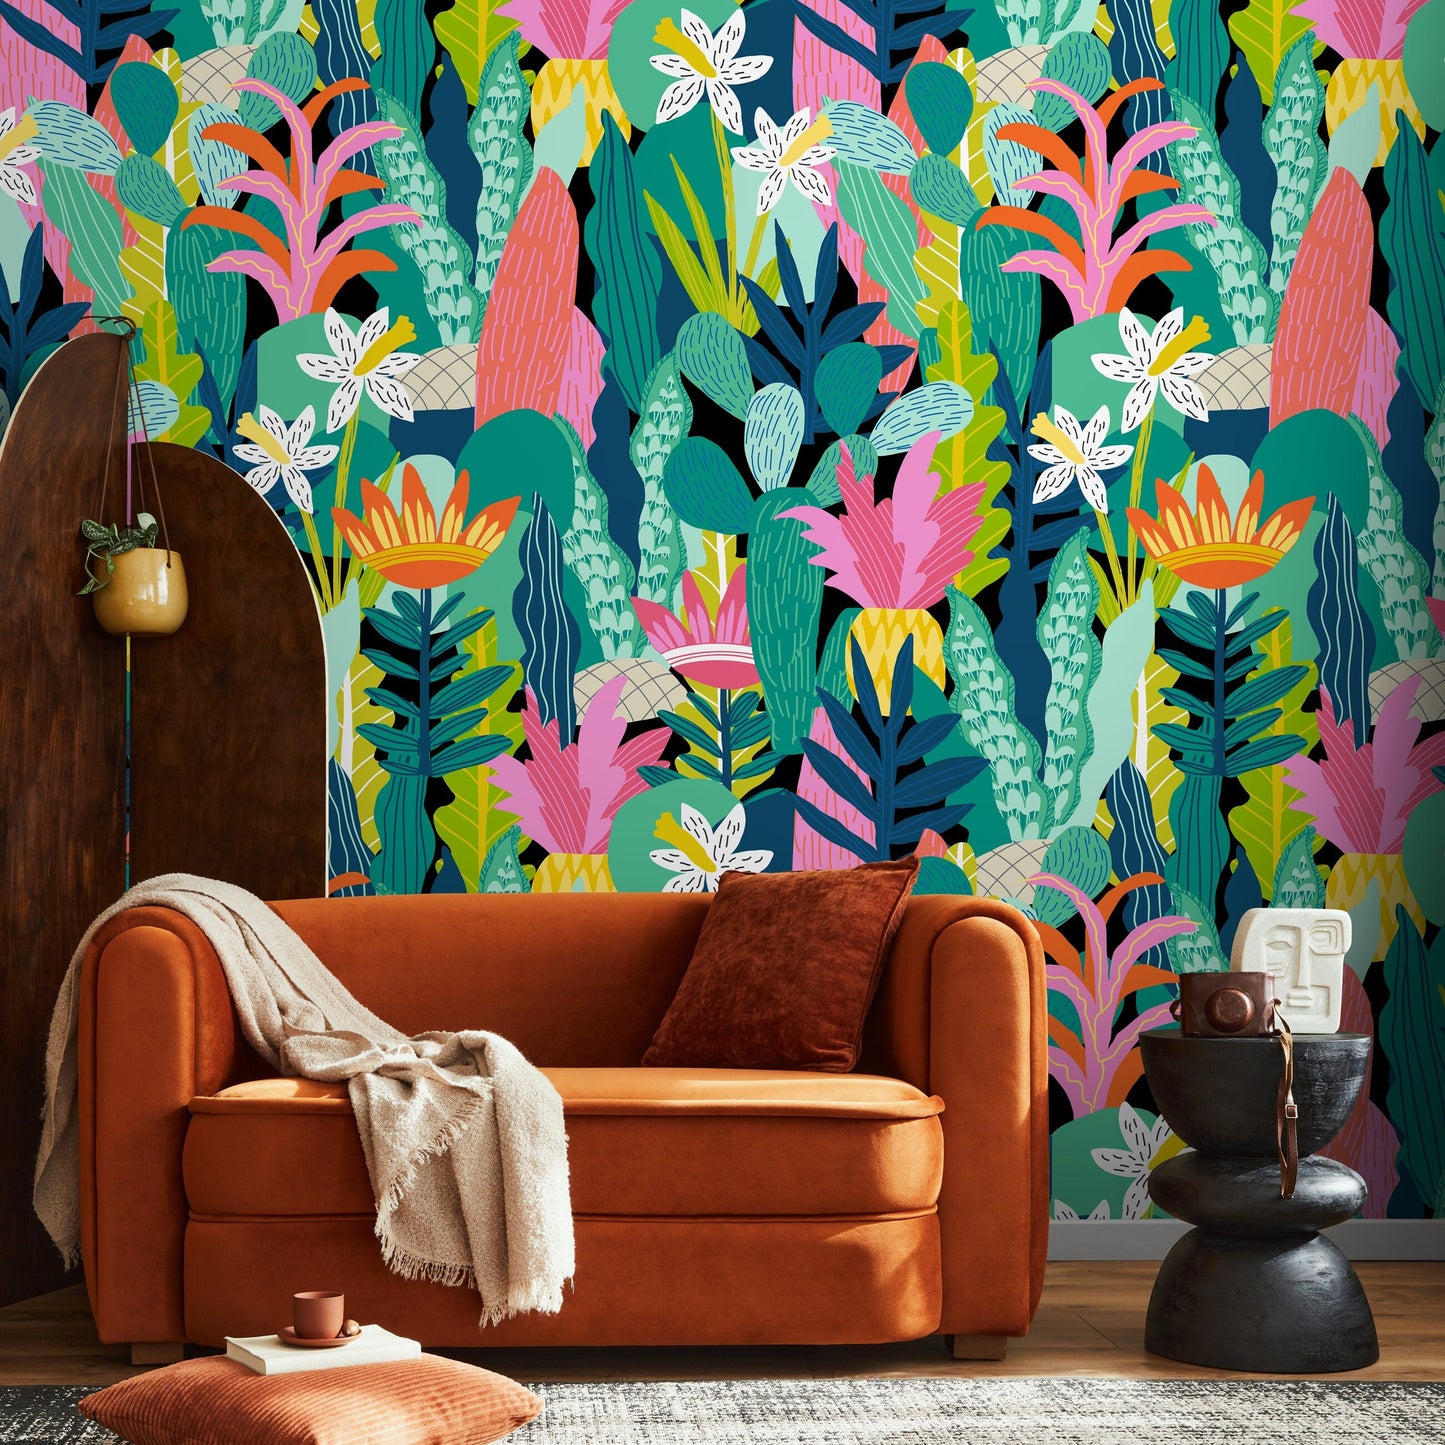 Colorful Plants and Flower Wallpaper / Peel and Stick Wallpaper Removable Wallpaper Home Decor Wall Art Wall Decor Room Decor - C687